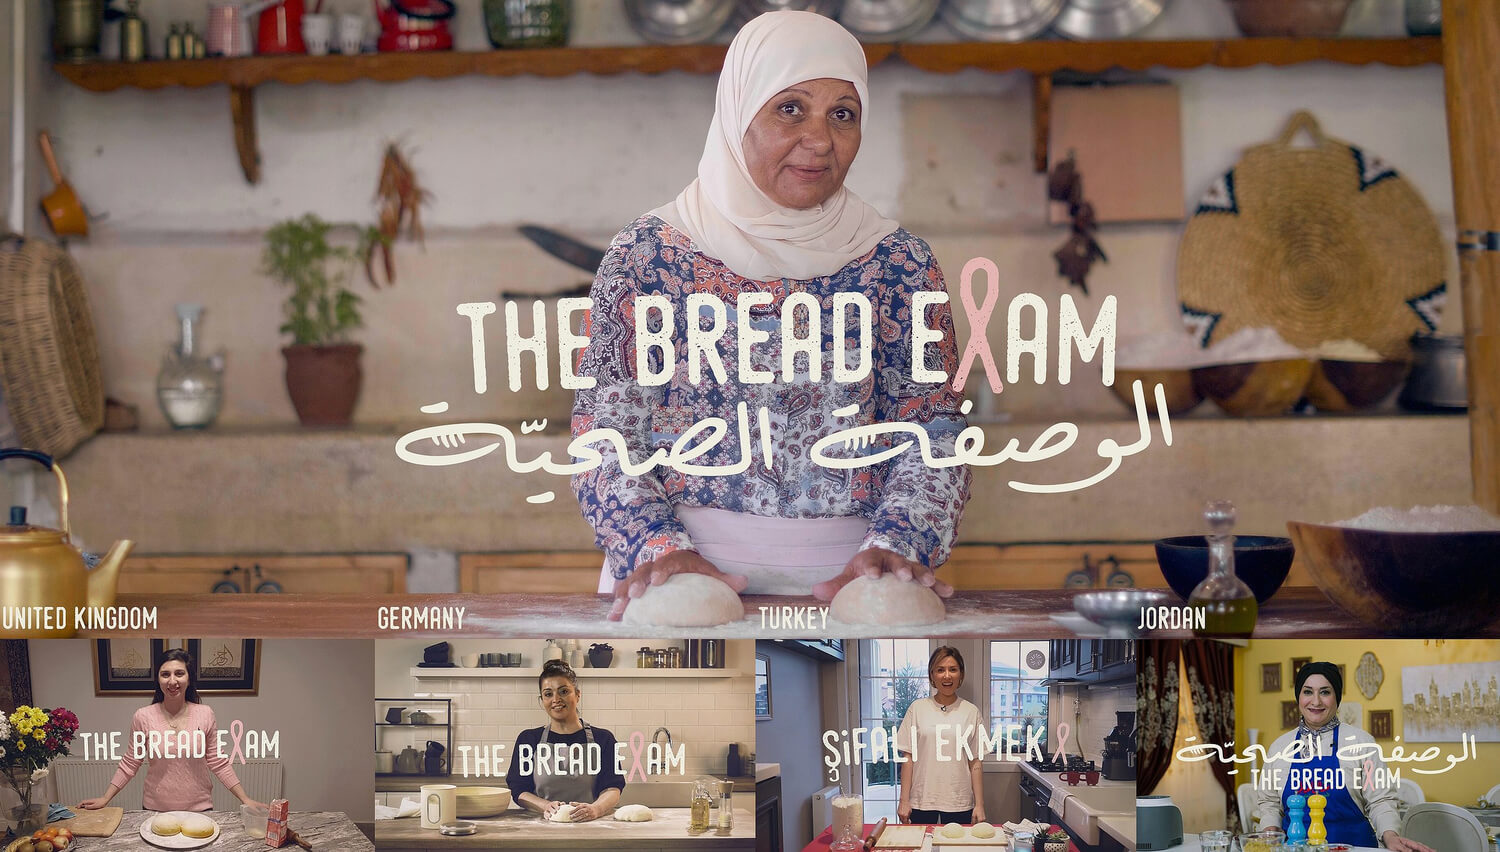 The Bread Exam, Campaigns of the world